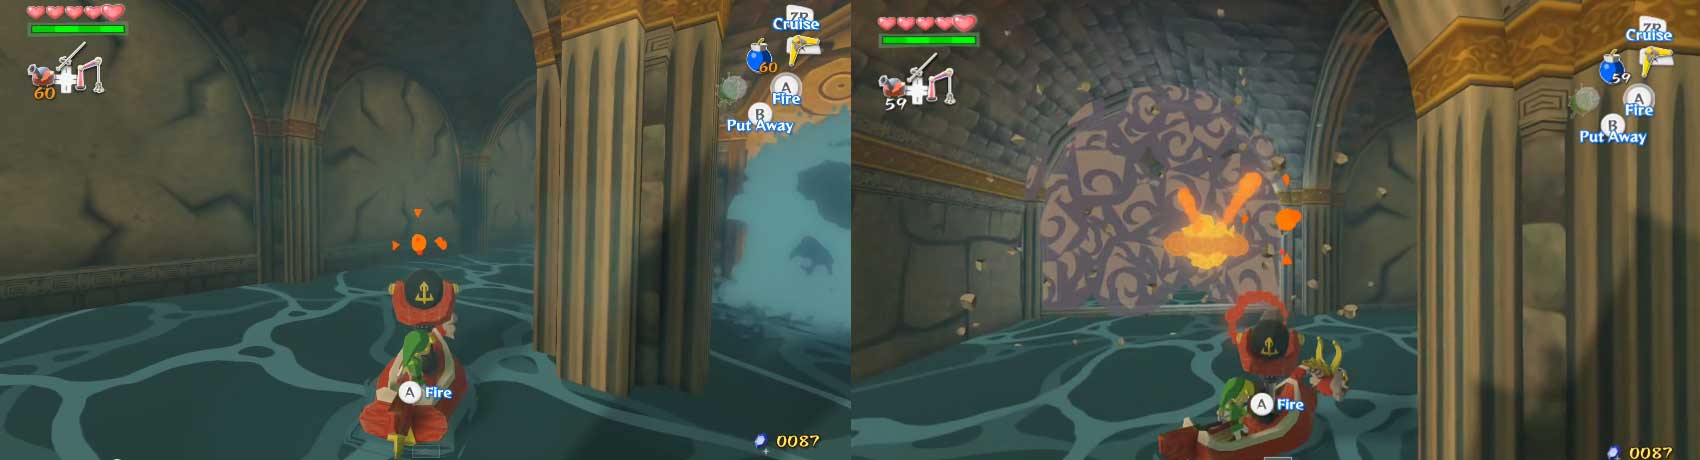 Equip the Bombs and use the boat’s cannon to shoot Bombs at the wall sections. If the hit is good, the wall section will break, revealing a hole to another section.